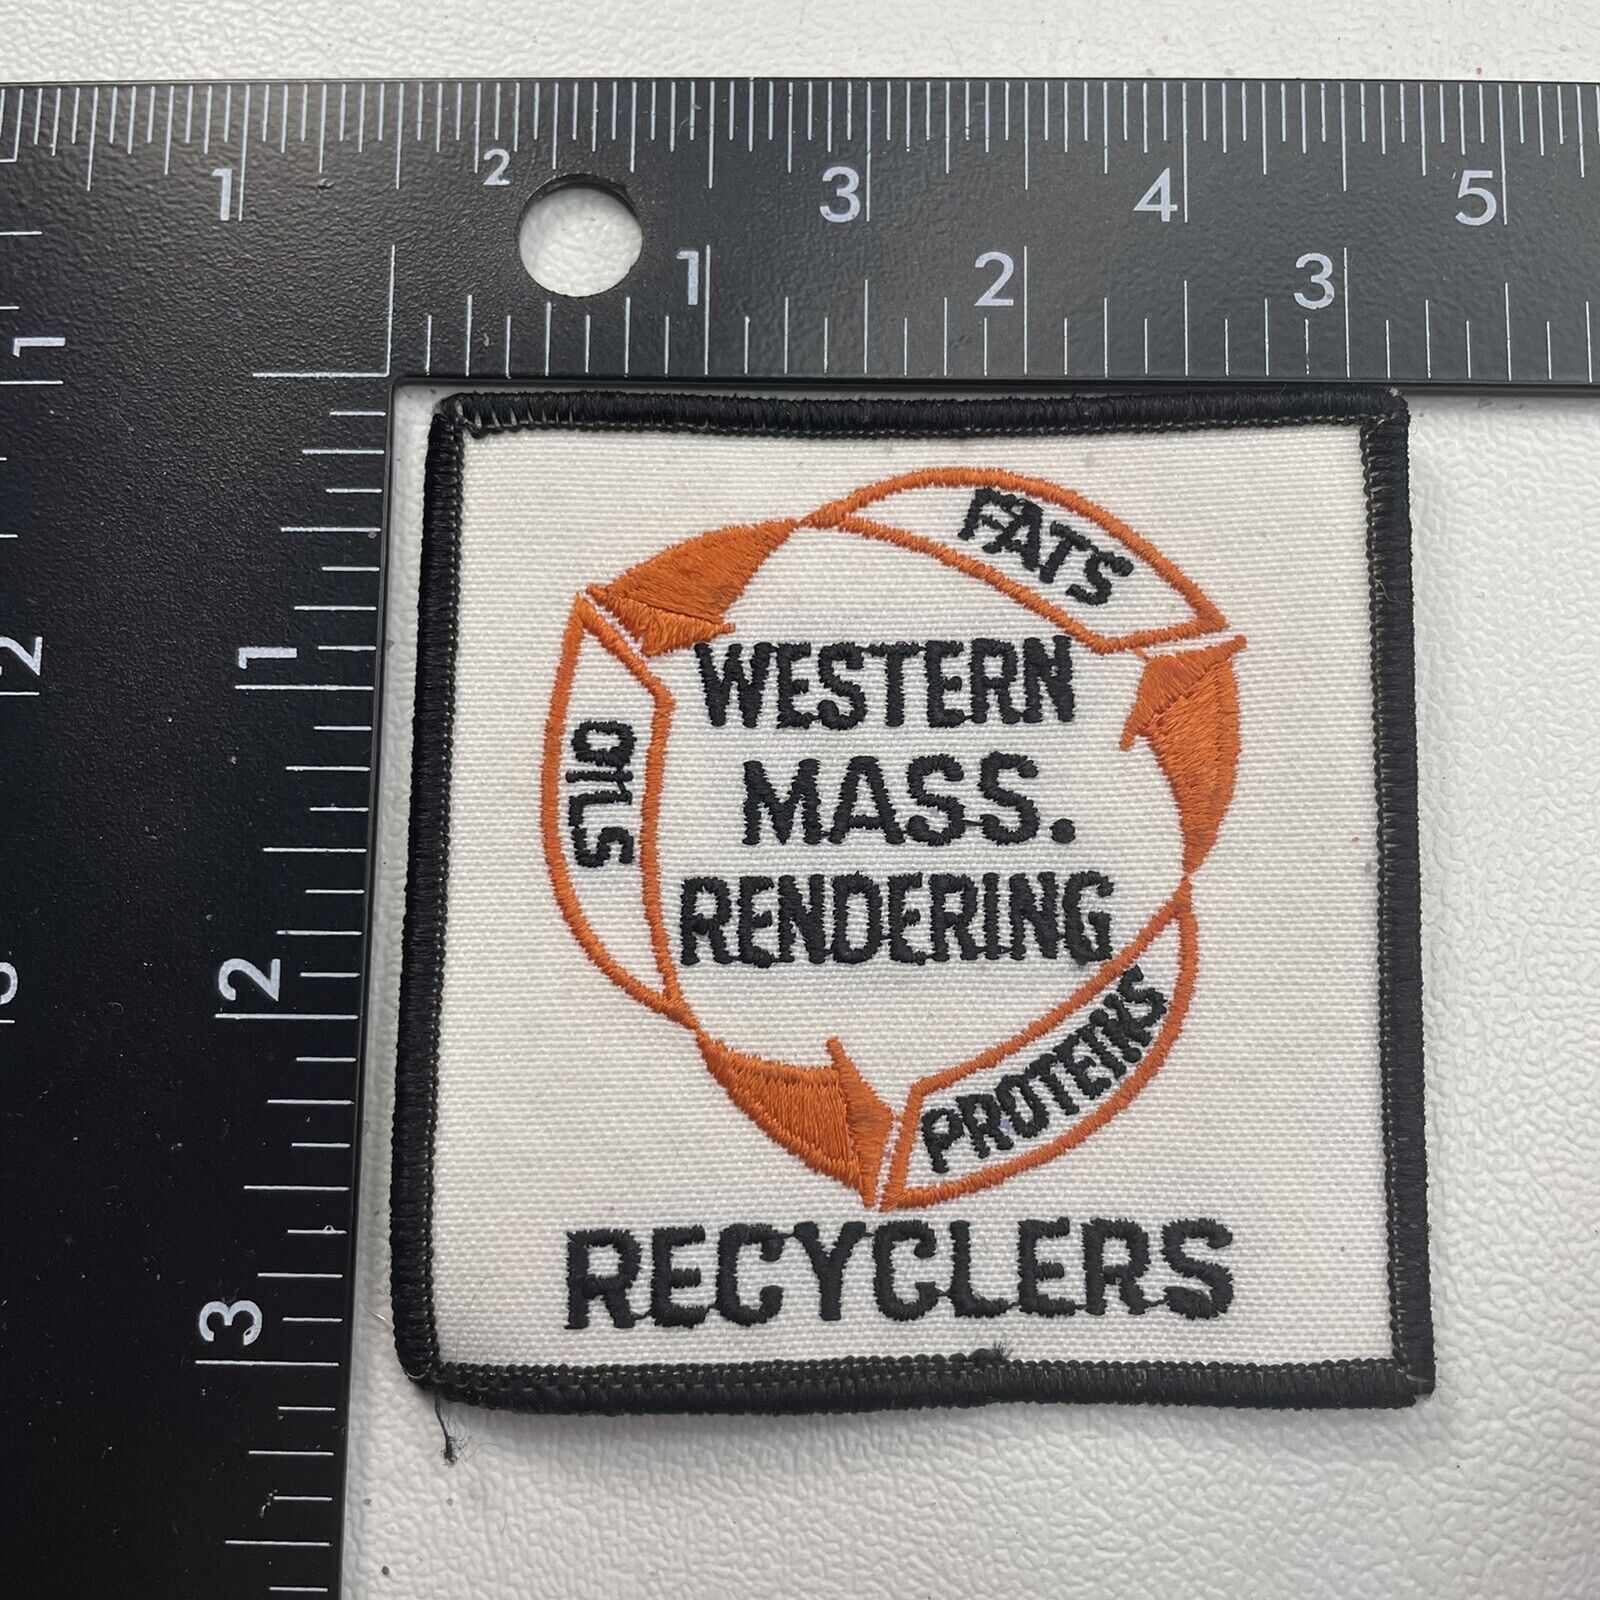 Vtg WESTERN MASS. RENDERING RECYCLERS Advertising Patch (Fats Oils Proteins)C085